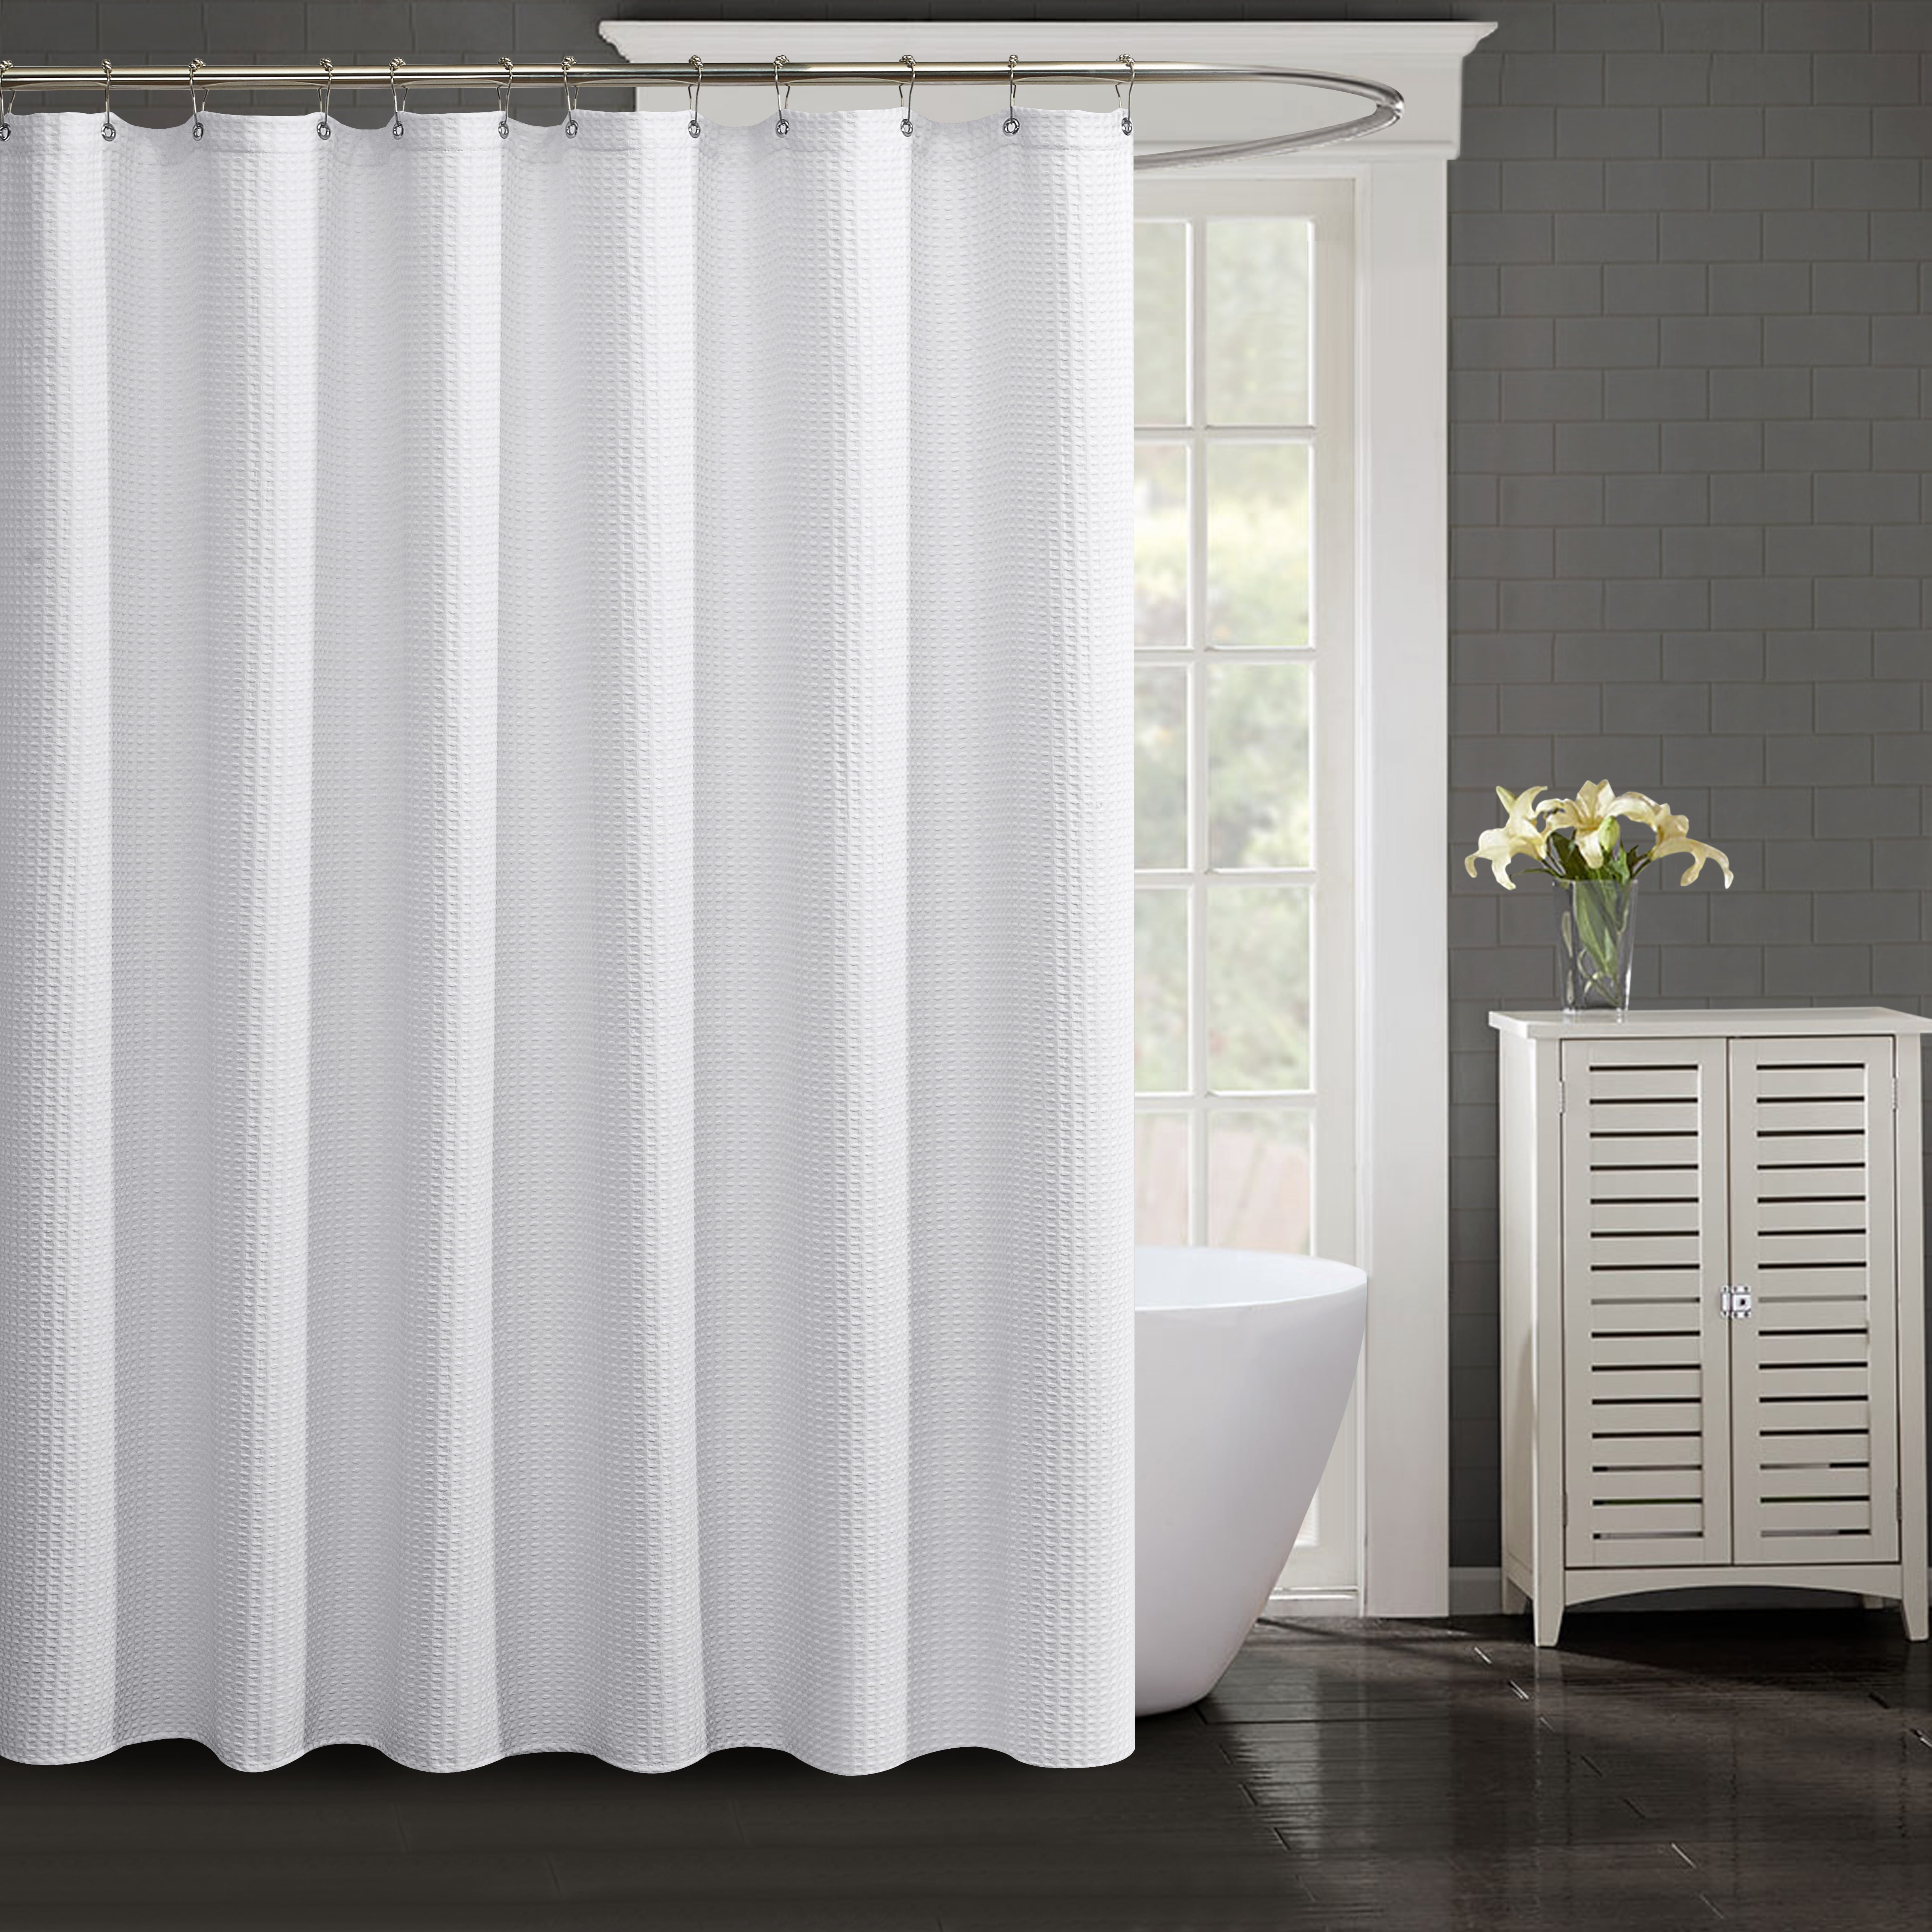 Fabric Shower Curtain, What Size Shower Curtain For 72 Inch Tub